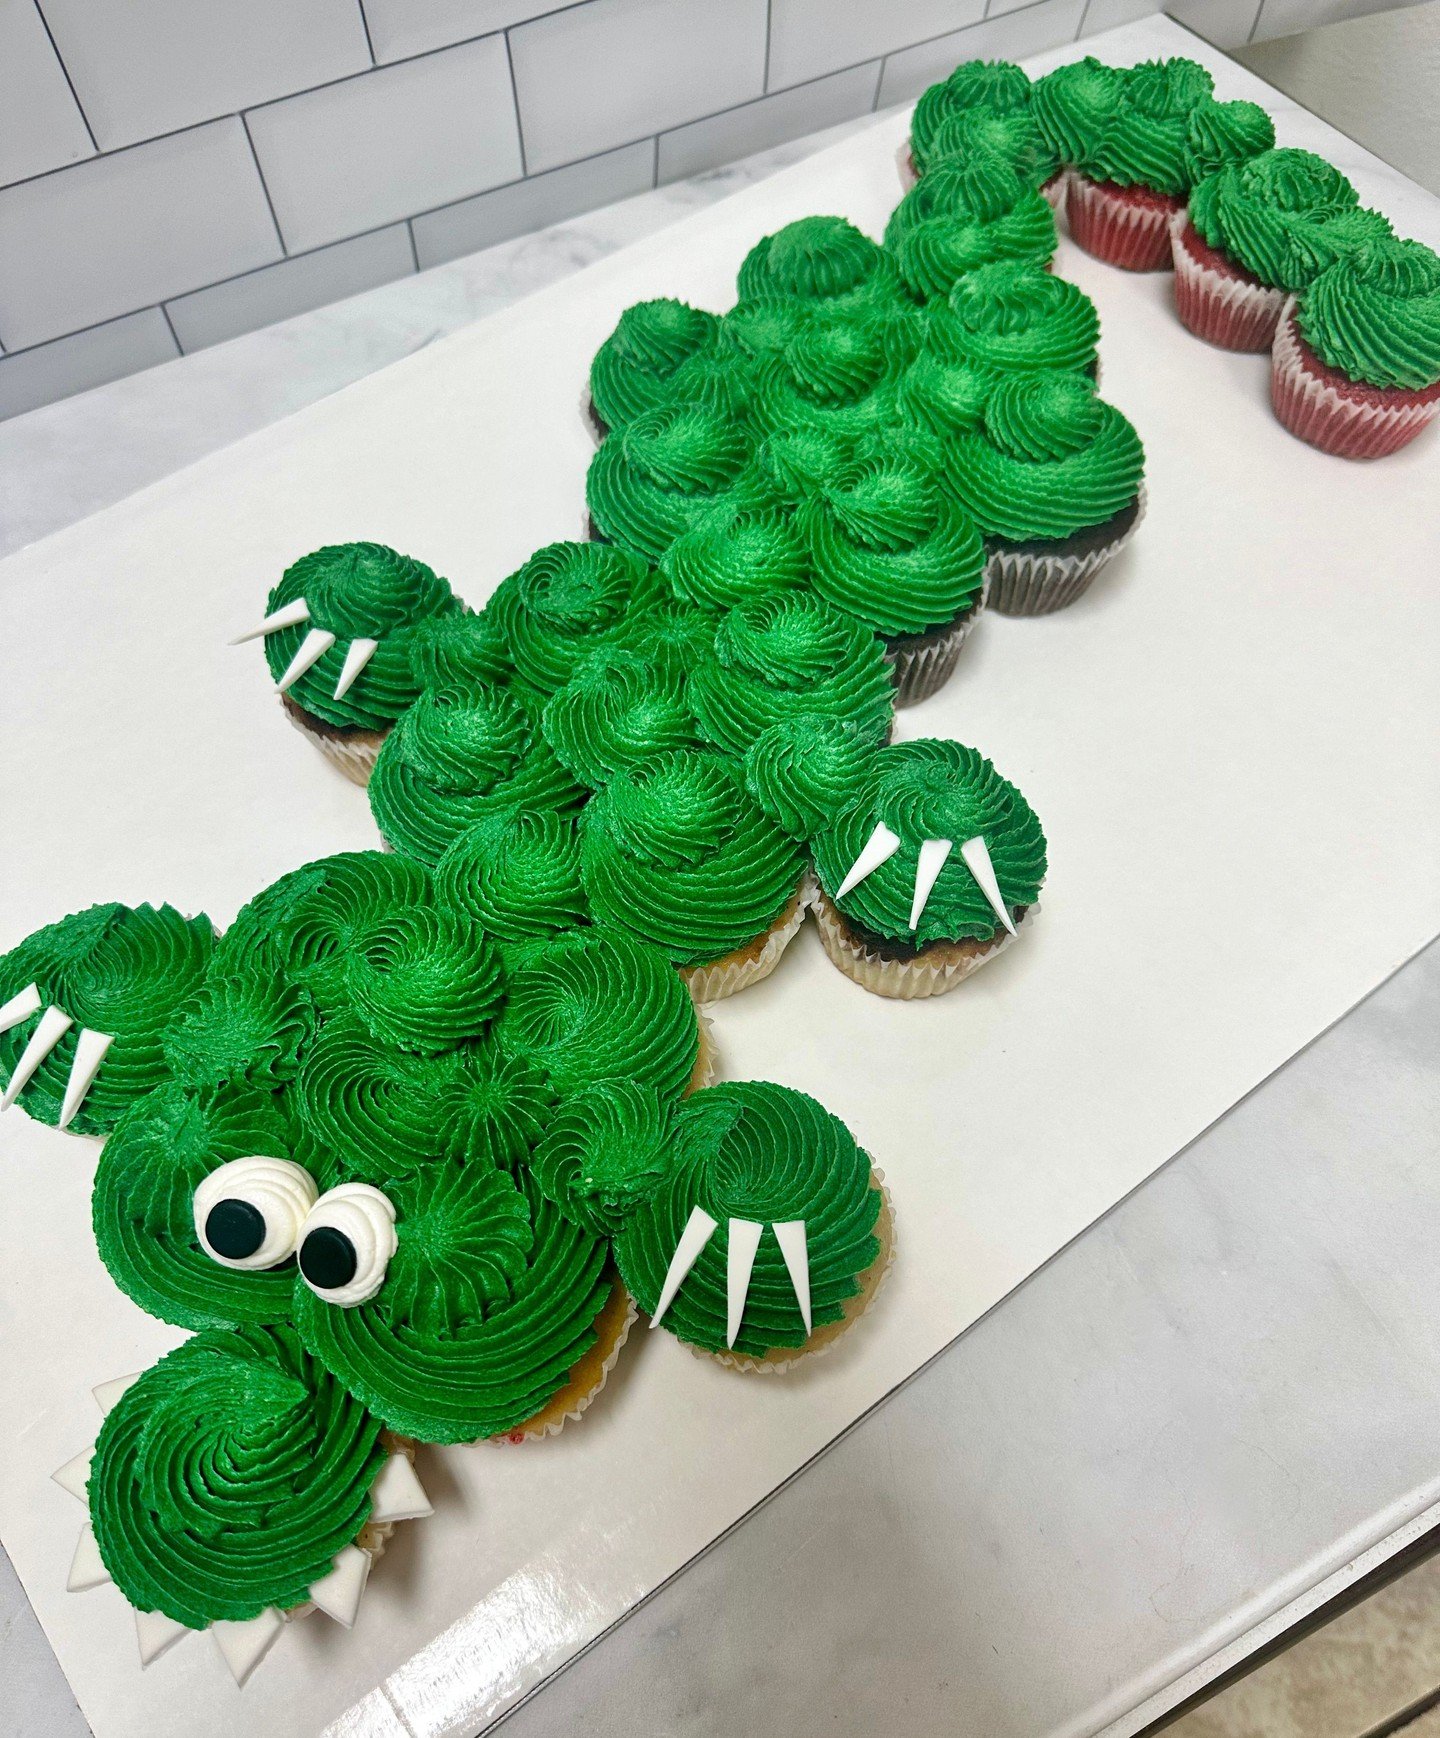 Know the difference between an alligator and a crocodile? One'll see you later, the other'll see you after a while 🐊

#crocodilecupcakes #kupcakekitchen #wantcake #pullapartcake #pullapartcupcakes #crocodilecake #alligatorcake #customcupcakes #amazi